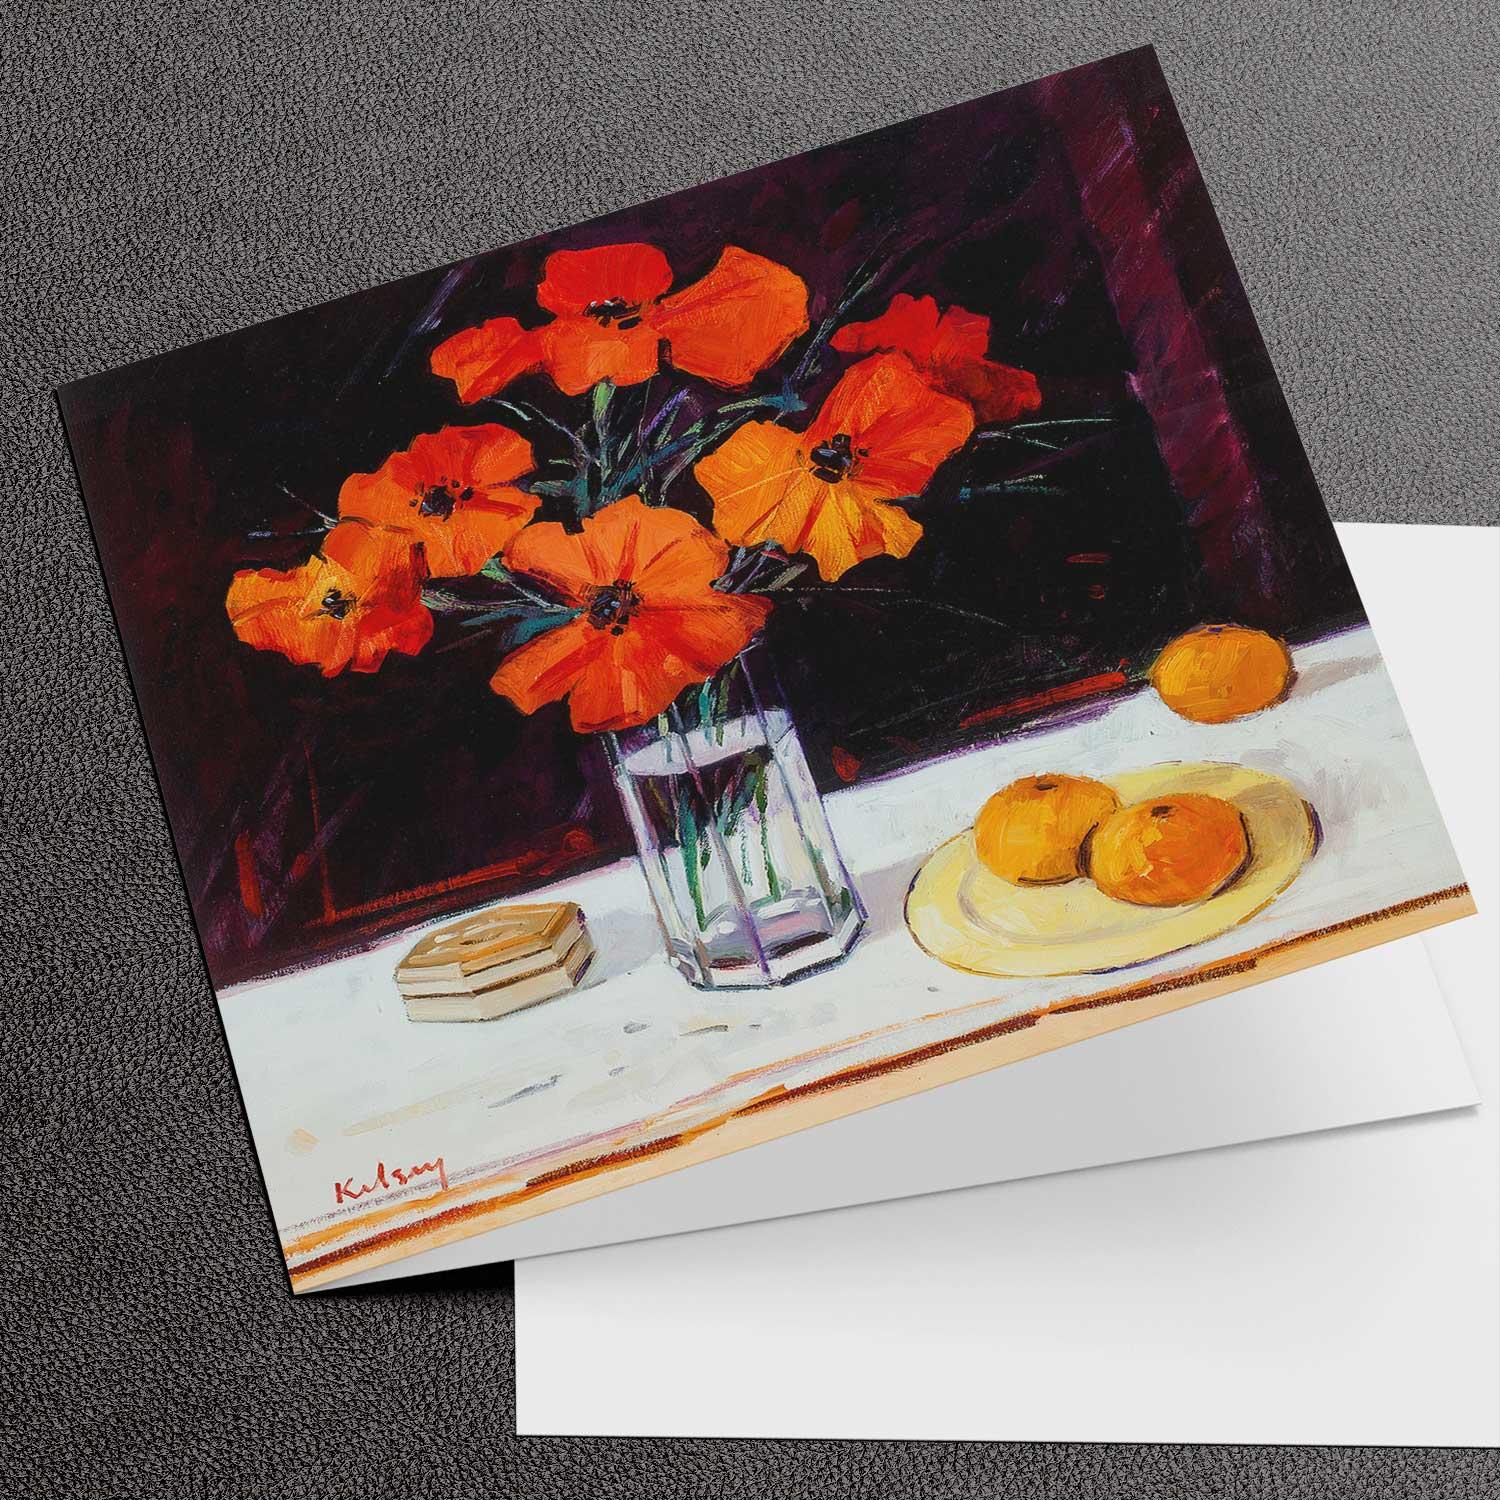 Poppies with Oranges Greeting Card from an original painting by artist Robert Kelsey